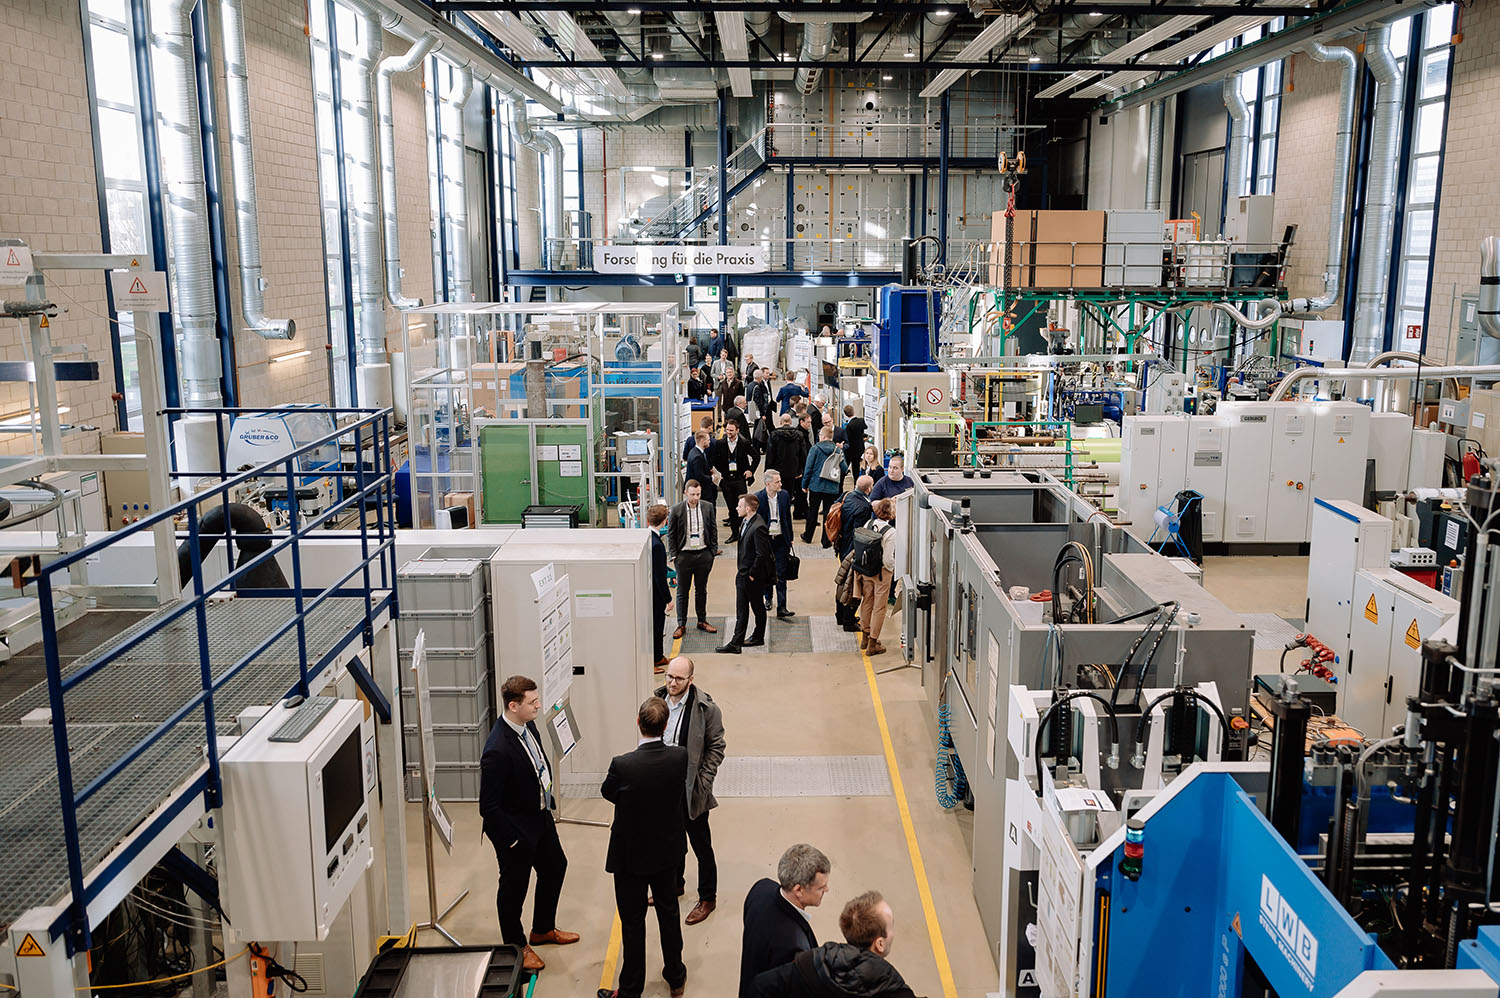 The IKV Colloquium demonstrated the plastics industry's resilience in addressing current challenges. On February 28th-29th, 2024, RWTH Aachen University's IKV organized an event fostering industry-academia exchanges. 